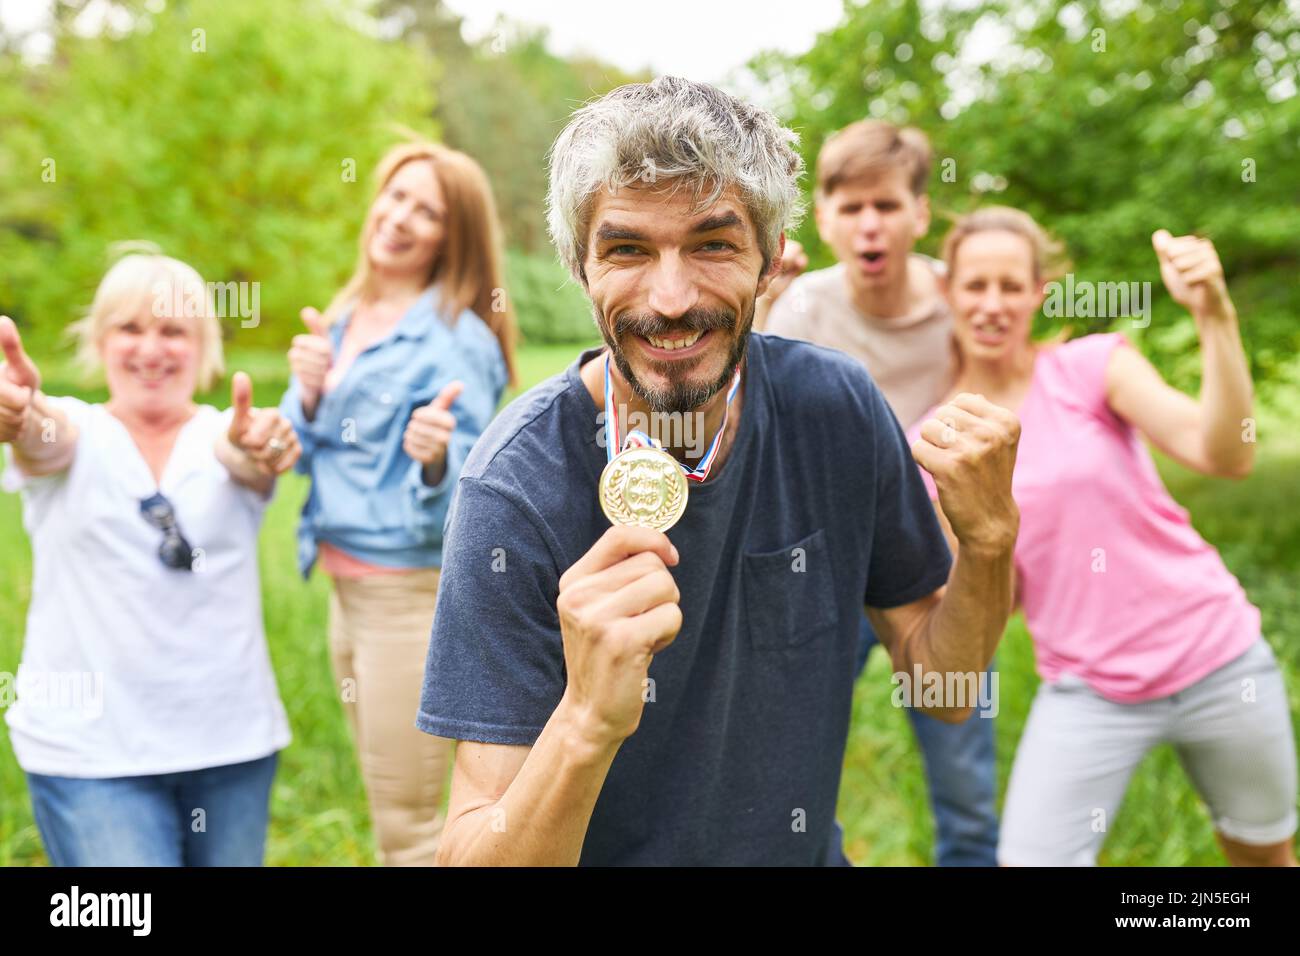 Successful man shows his medal and celebrates with his team after a win Stock Photo